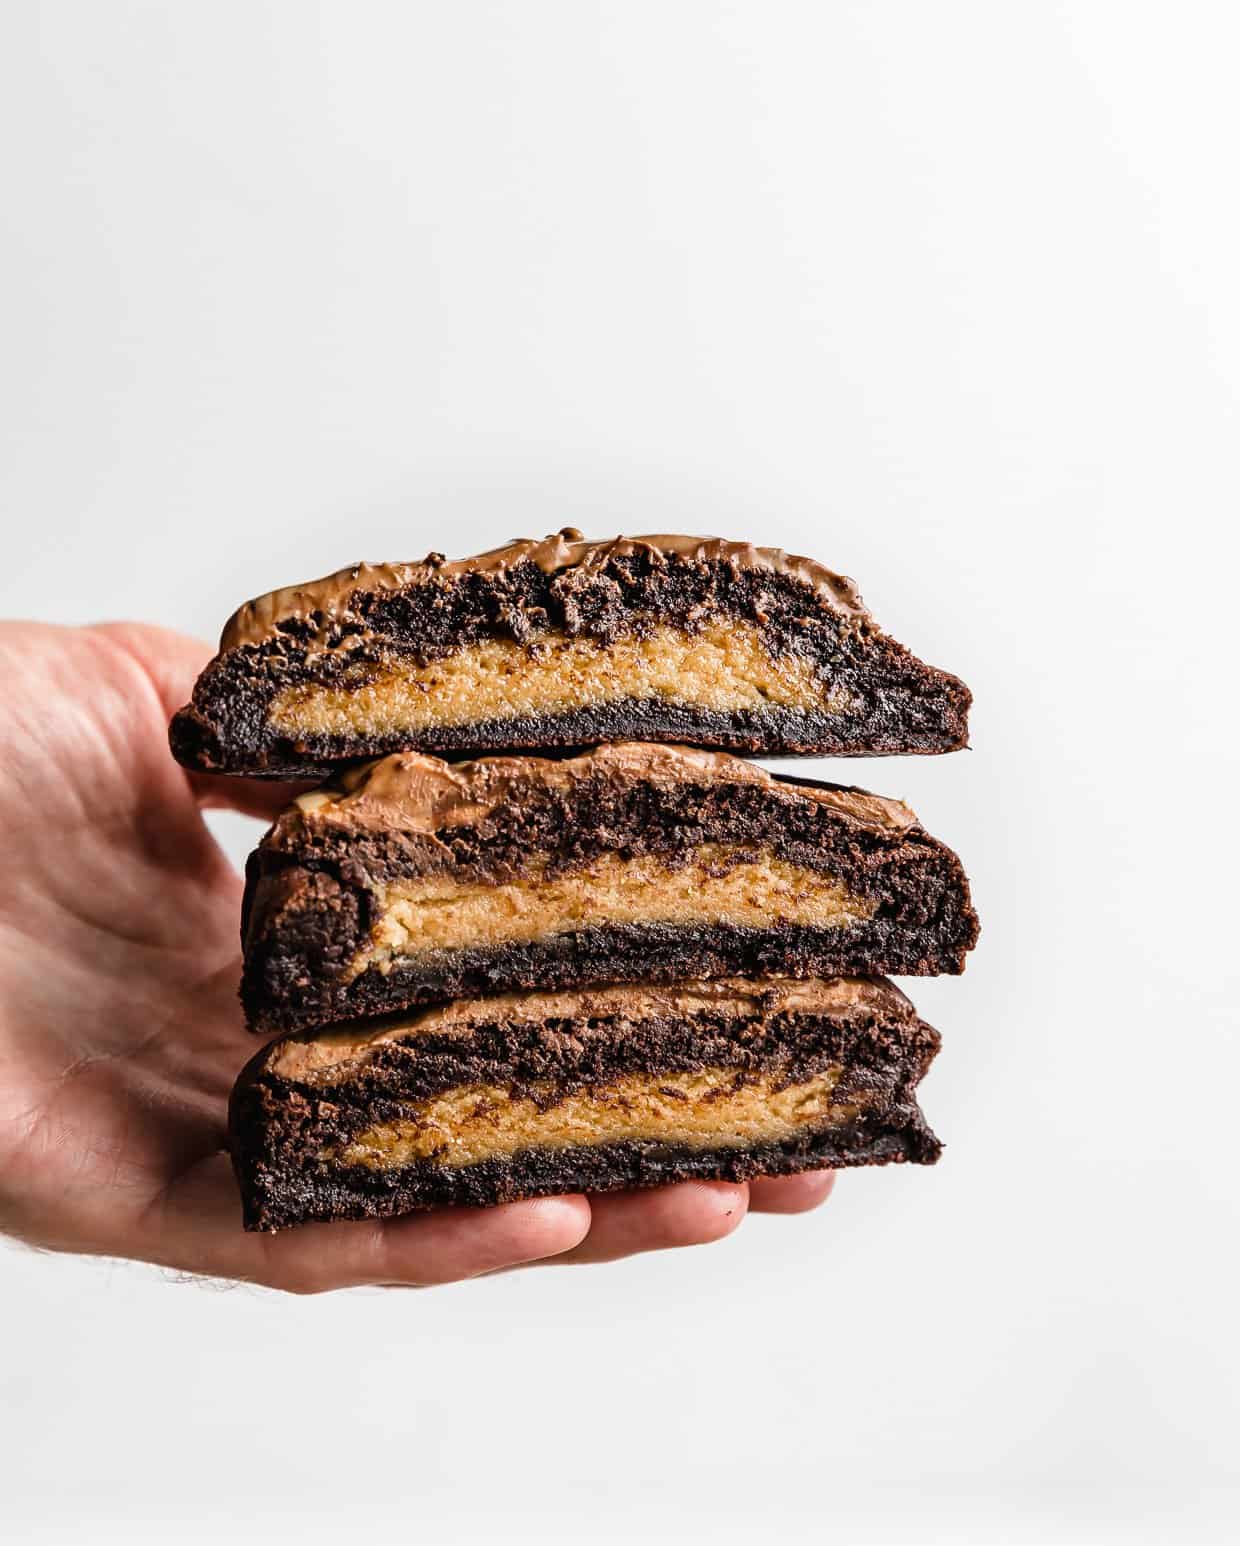 A hand holding Peanut Butter Brownie Cookies against a white background.